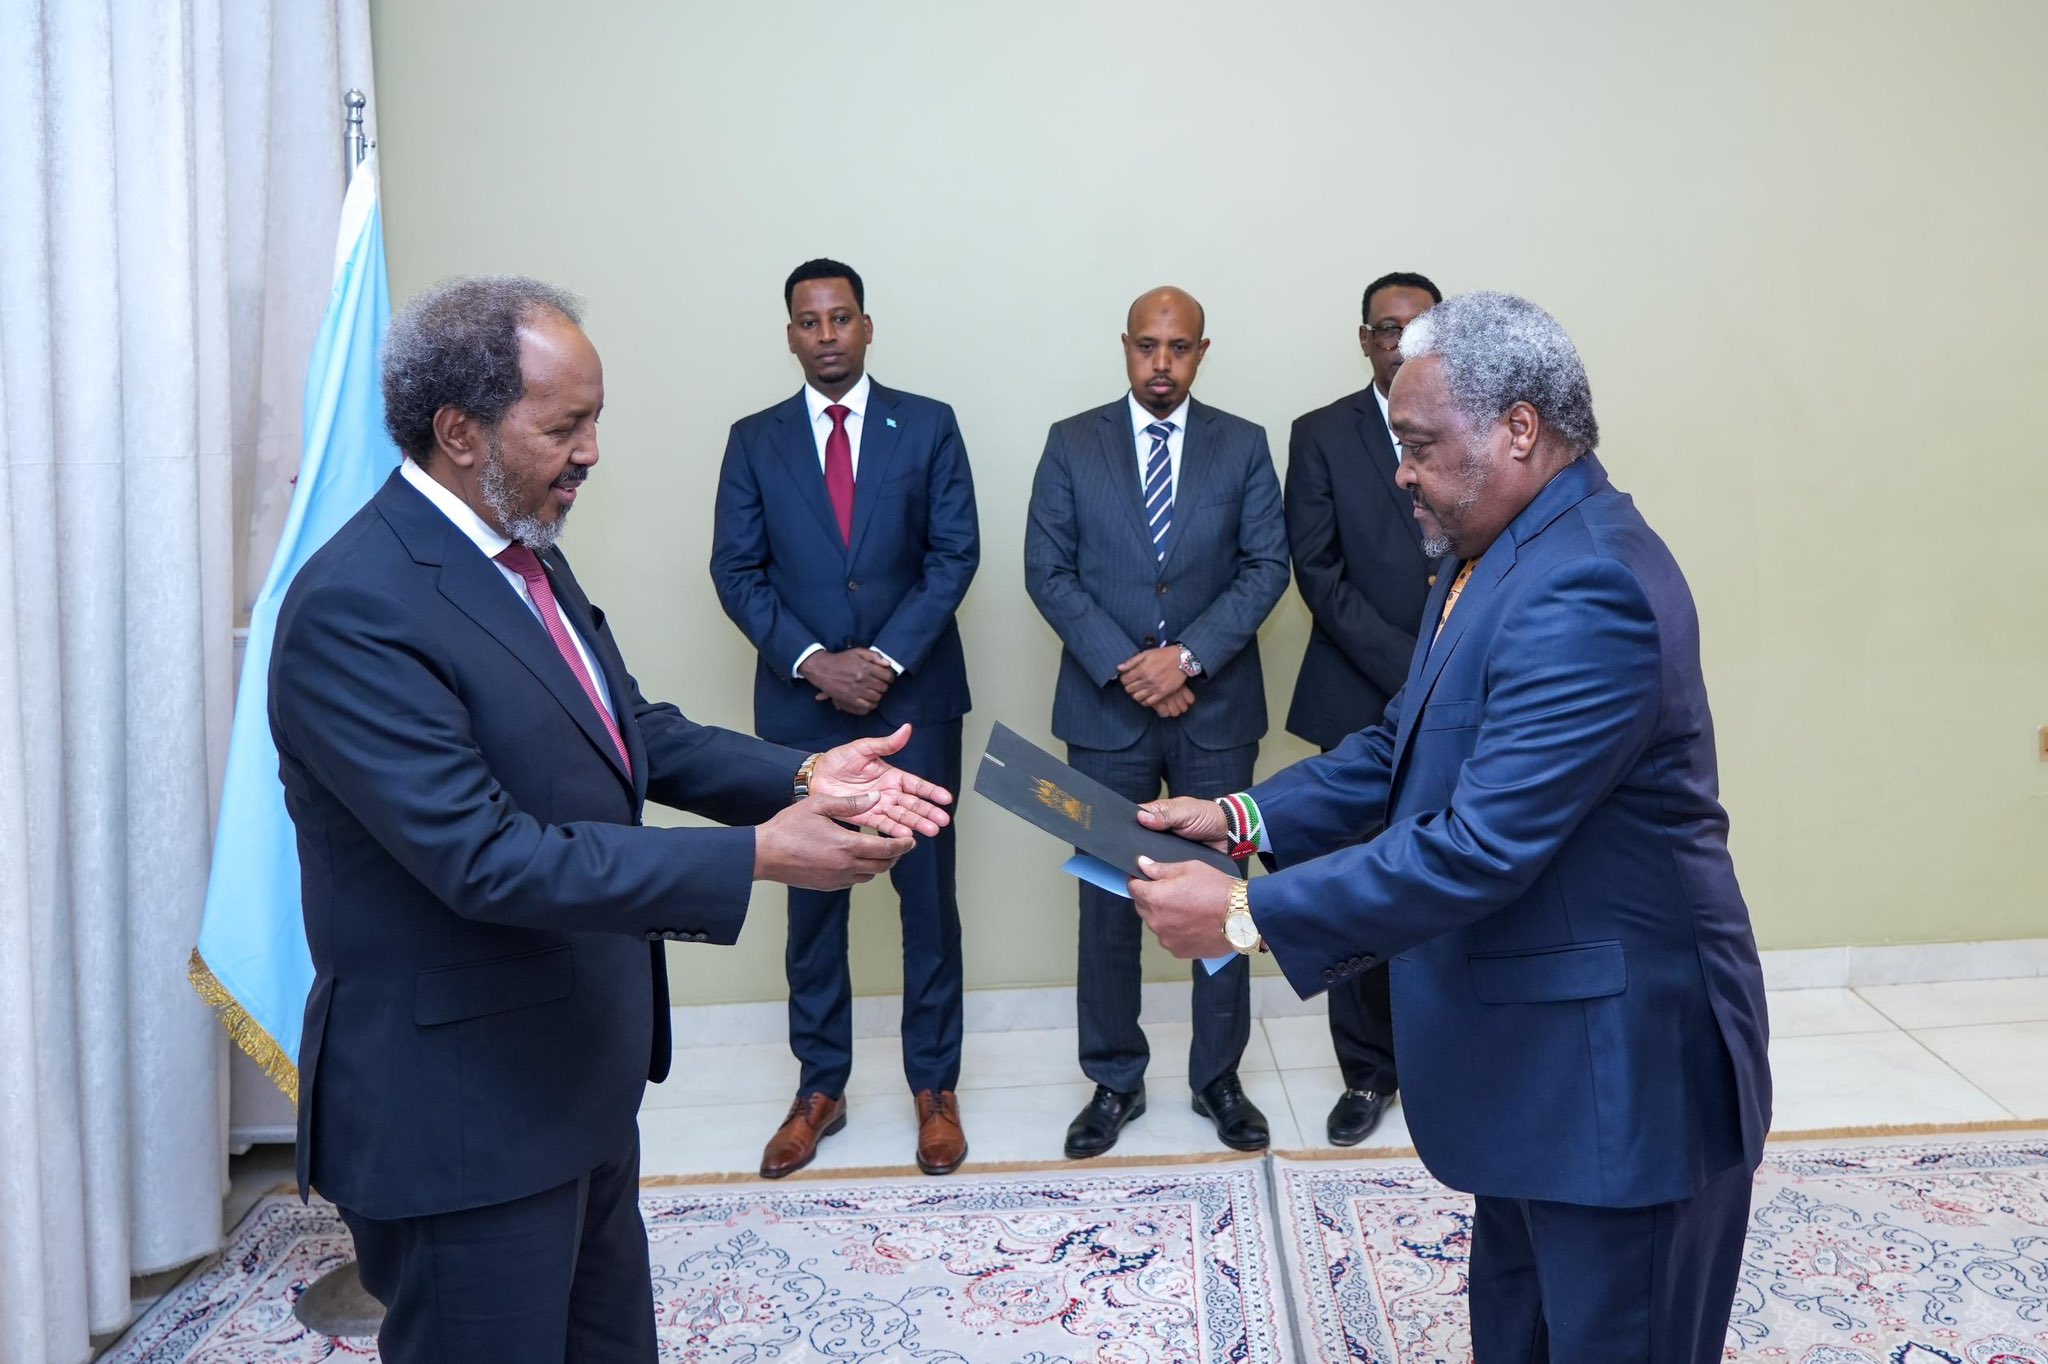 Kenyan envoy to Somalia details plans after presenting credentials to President Hassan